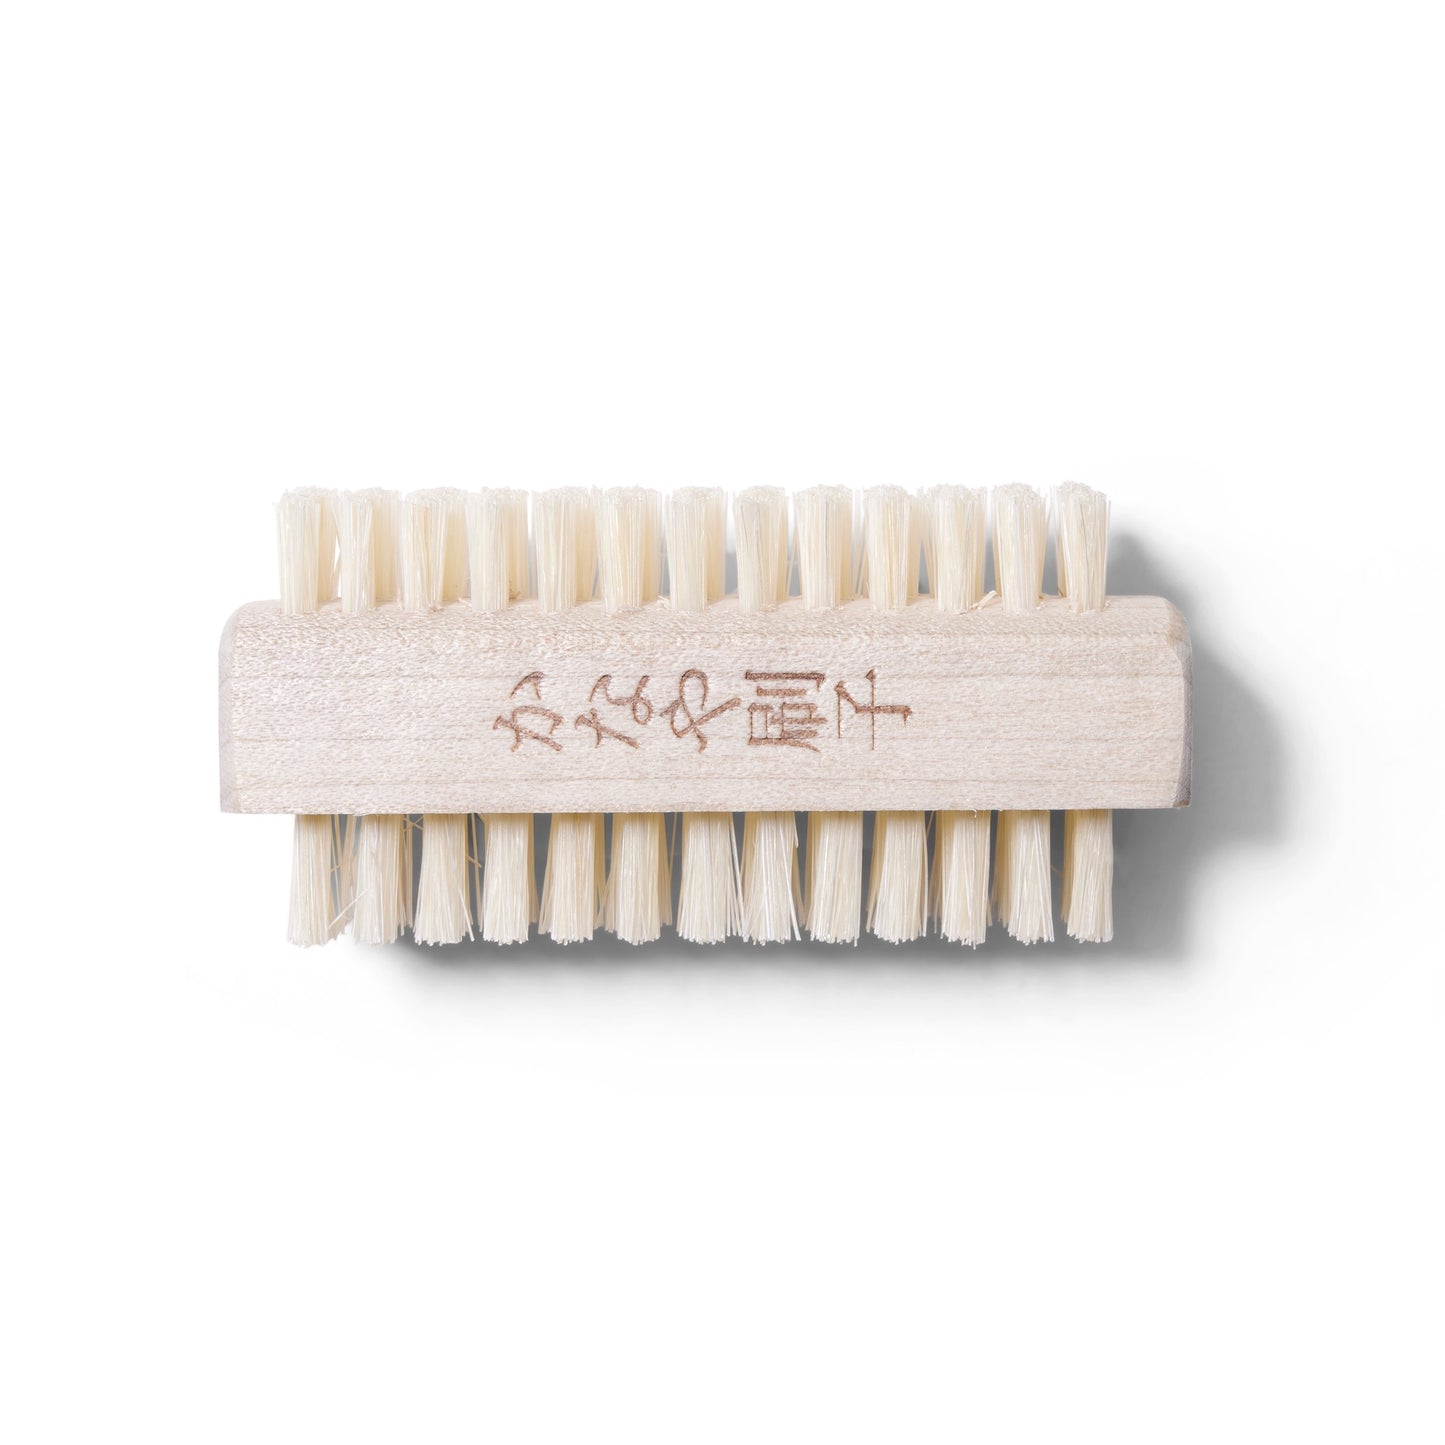 Front view of the dual sided Kanaya Nail Brush. The Brush is made of light colored boar bristles and light wood.